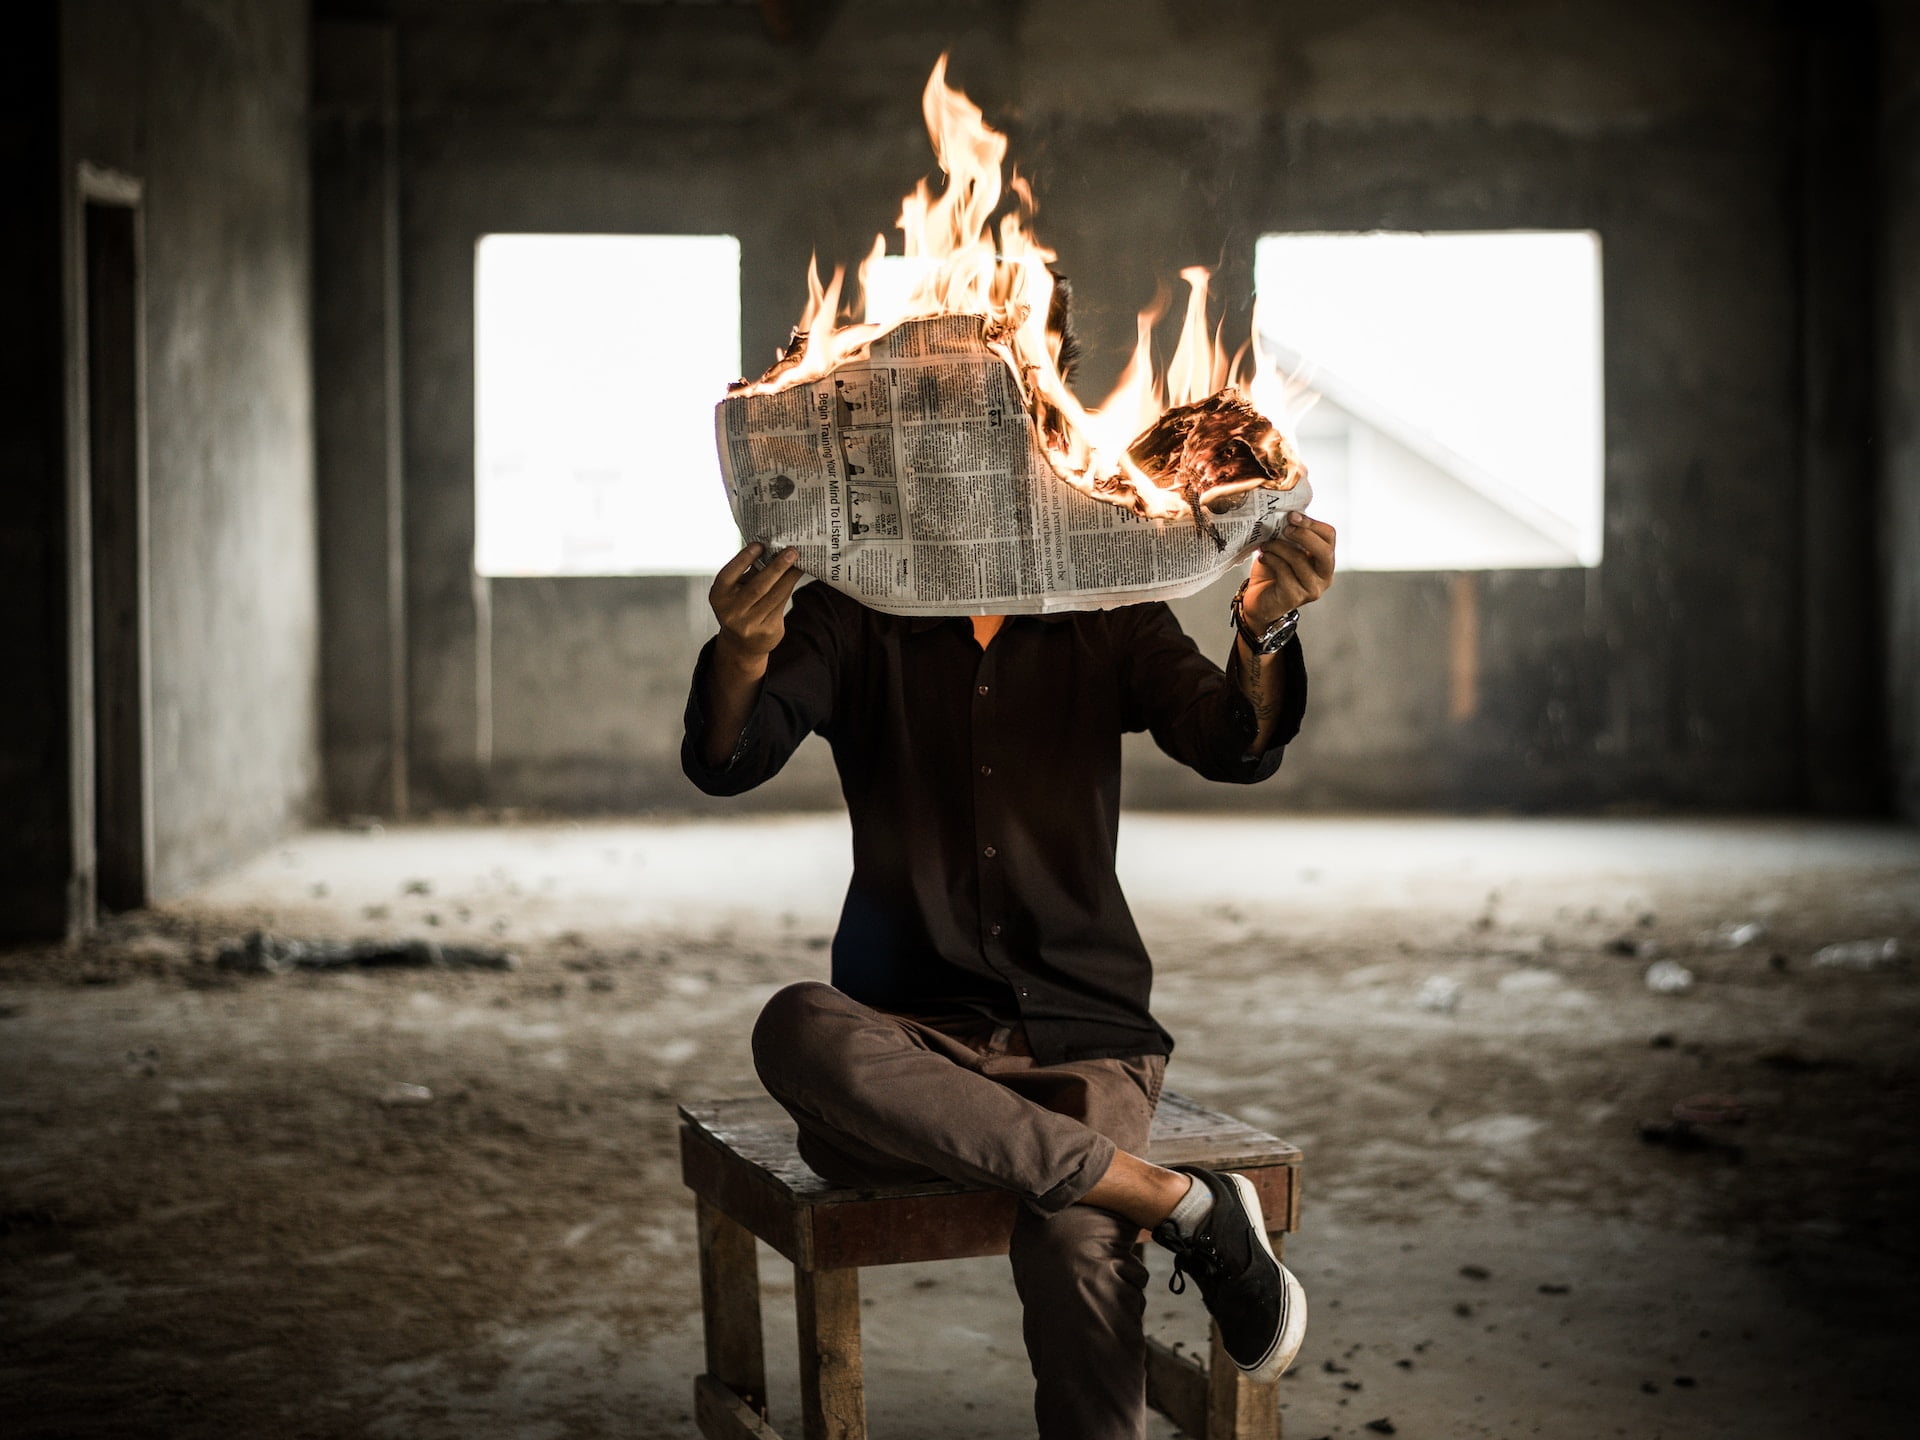 Depicts a person holding a burning newspaper. Used as a cover image for alternative investment news from the week of July 24th.